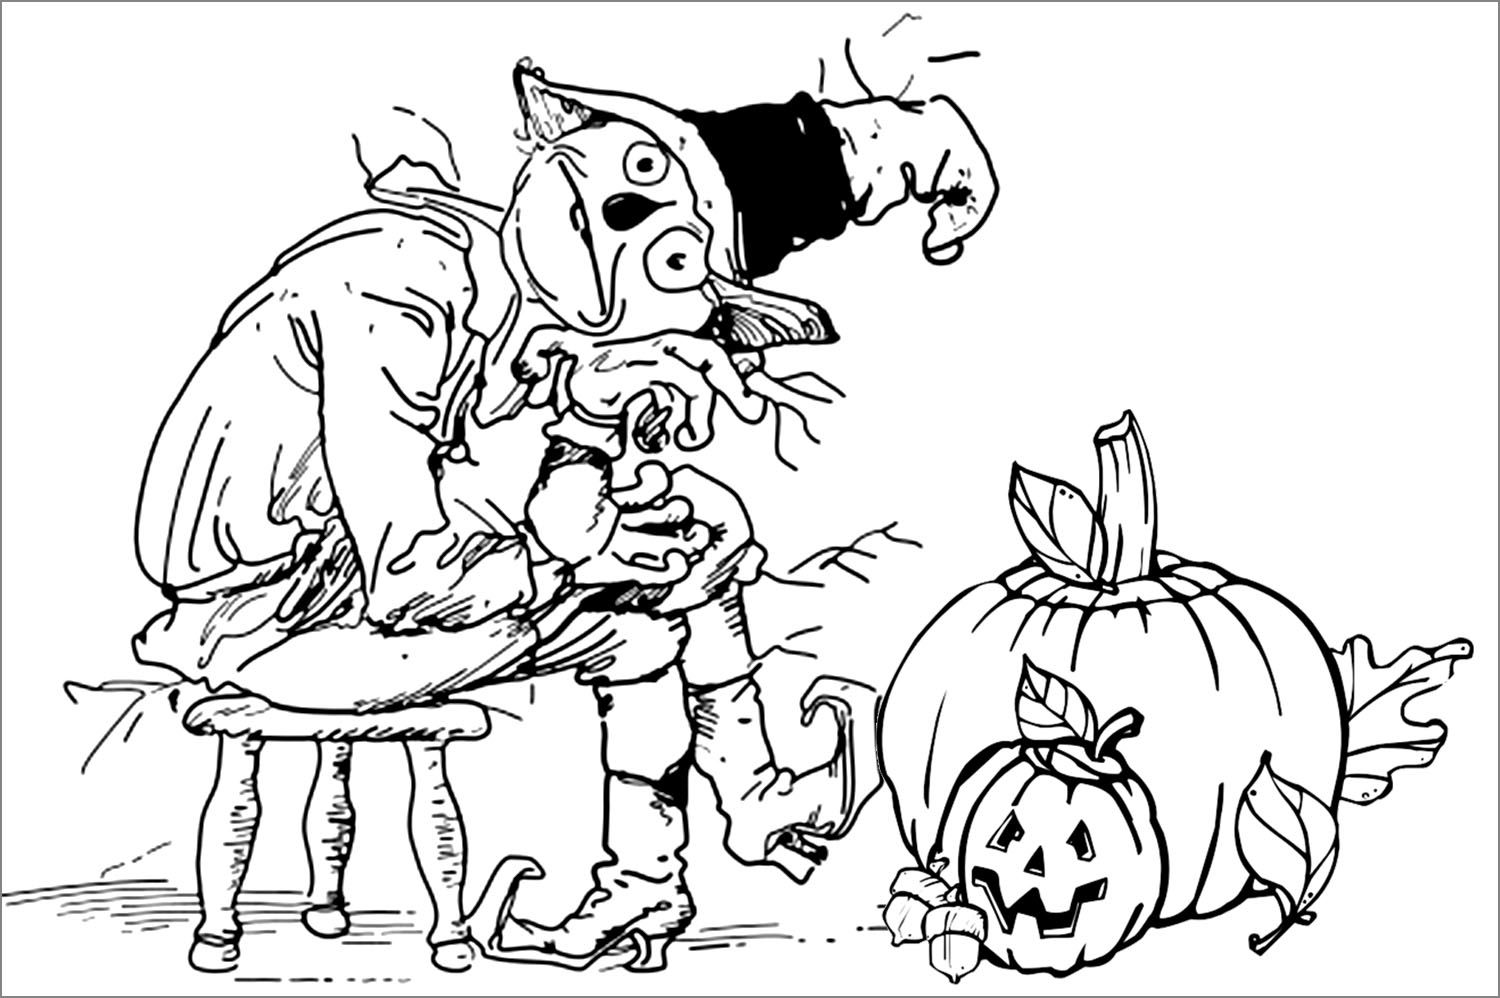 Printable Halloween Coloring Pages For Adults - Coloring Home